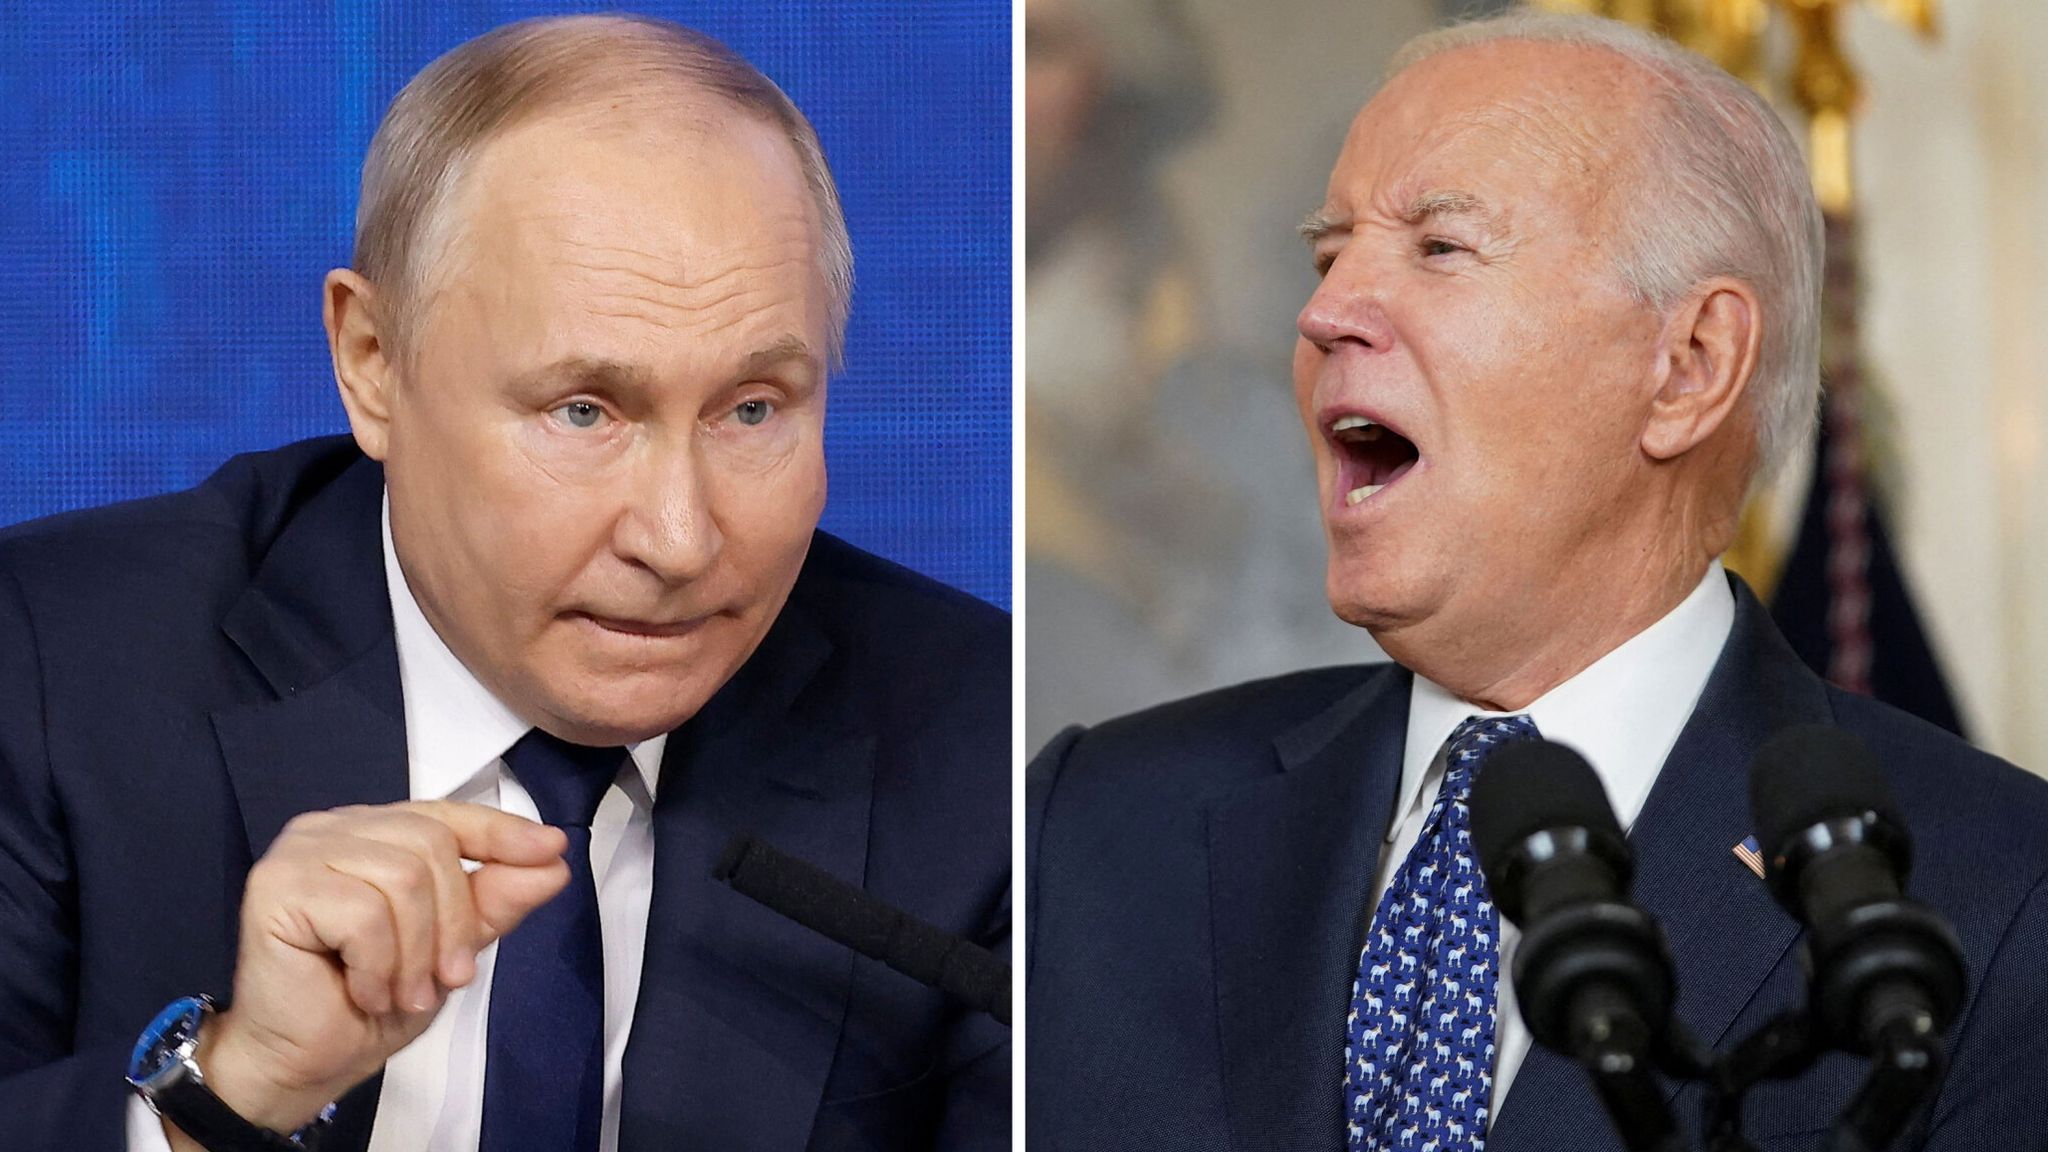 Global Poll Reveals Twice as Many People Would Prefer Putin as President Than Biden [Video]